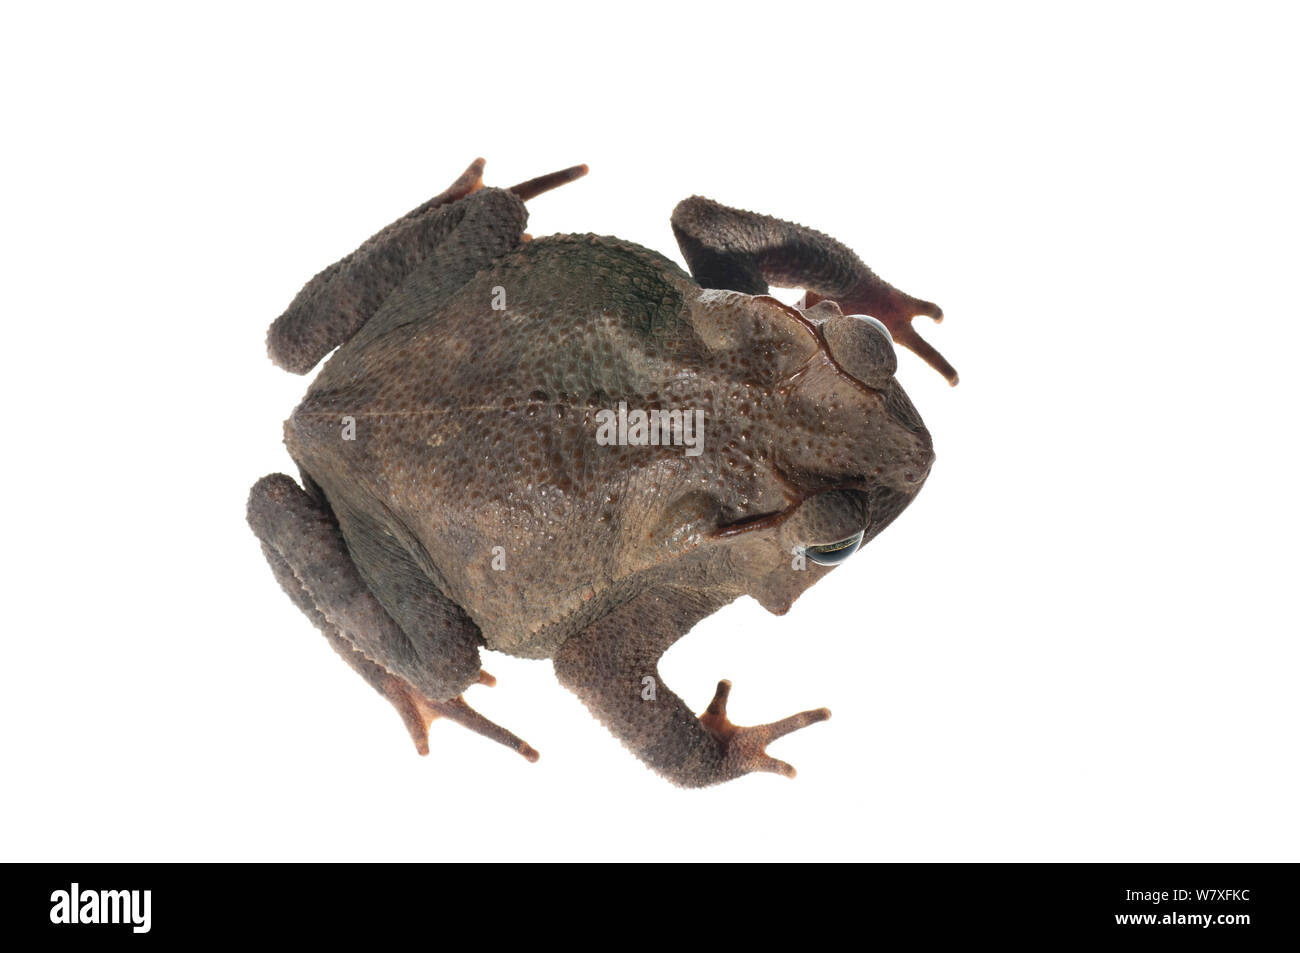 Crested toad (Rhinella martyi), Berbice River, Guyana, September. Meetyourneighbours.net project. Stock Photo